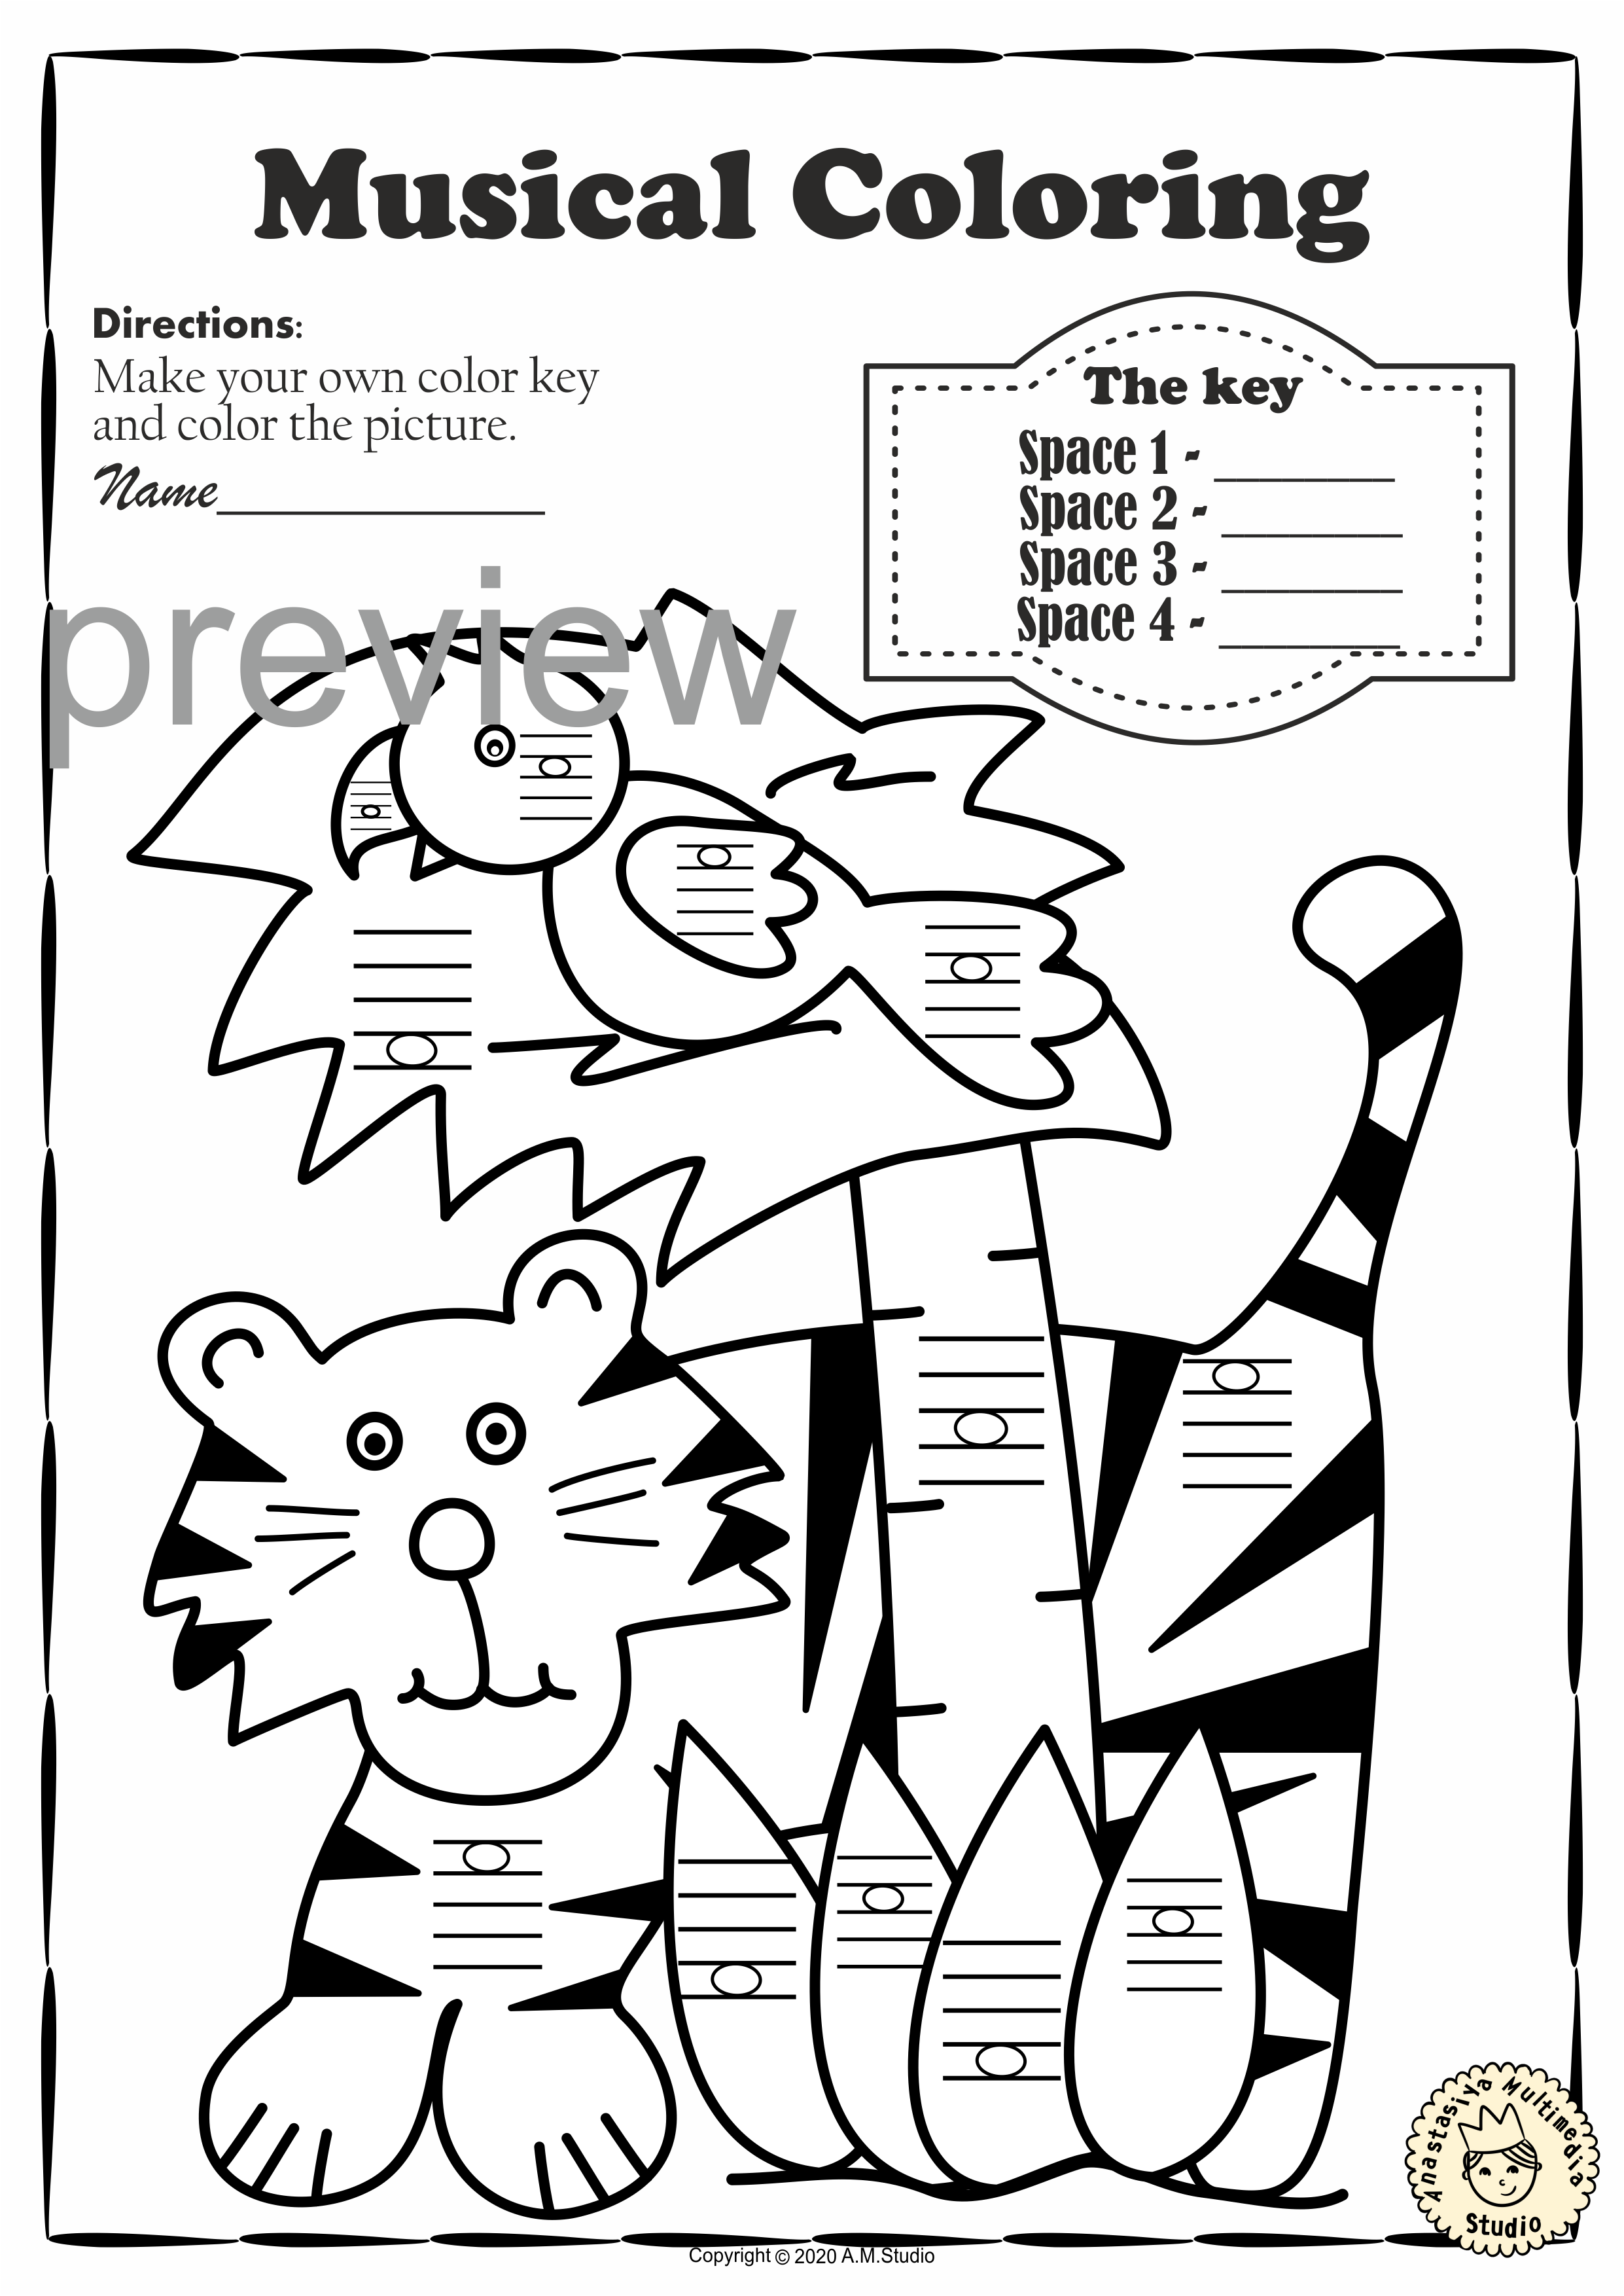 Summer Music Coloring Pages | Lines and Spaces Coloring Worksheets (img # 4)